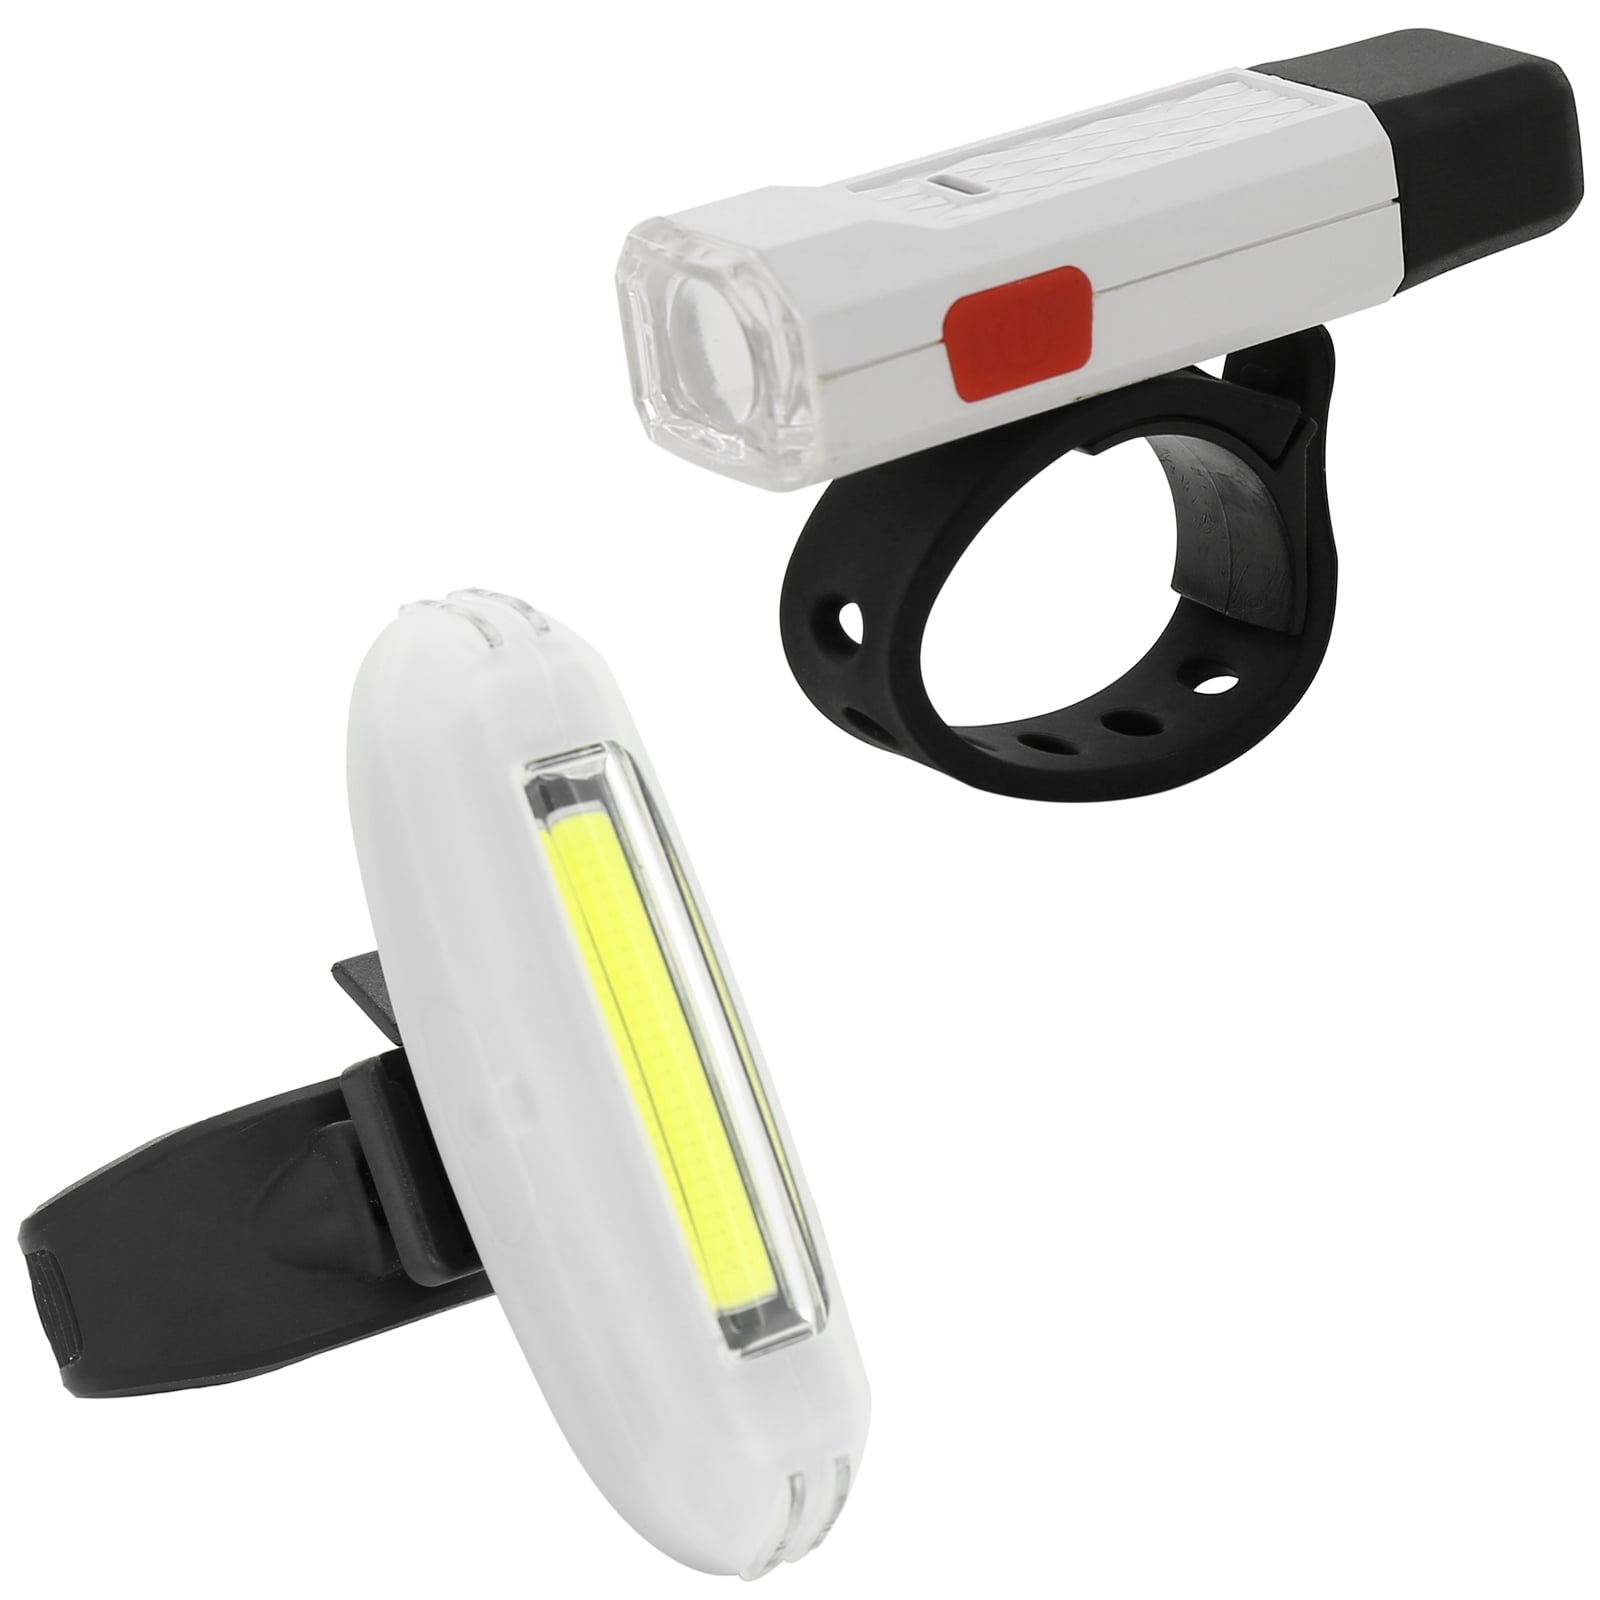 Details about   Bike Light Taillight Kit USB Rechargeable Battery Bicycle Headlight Flashlight 